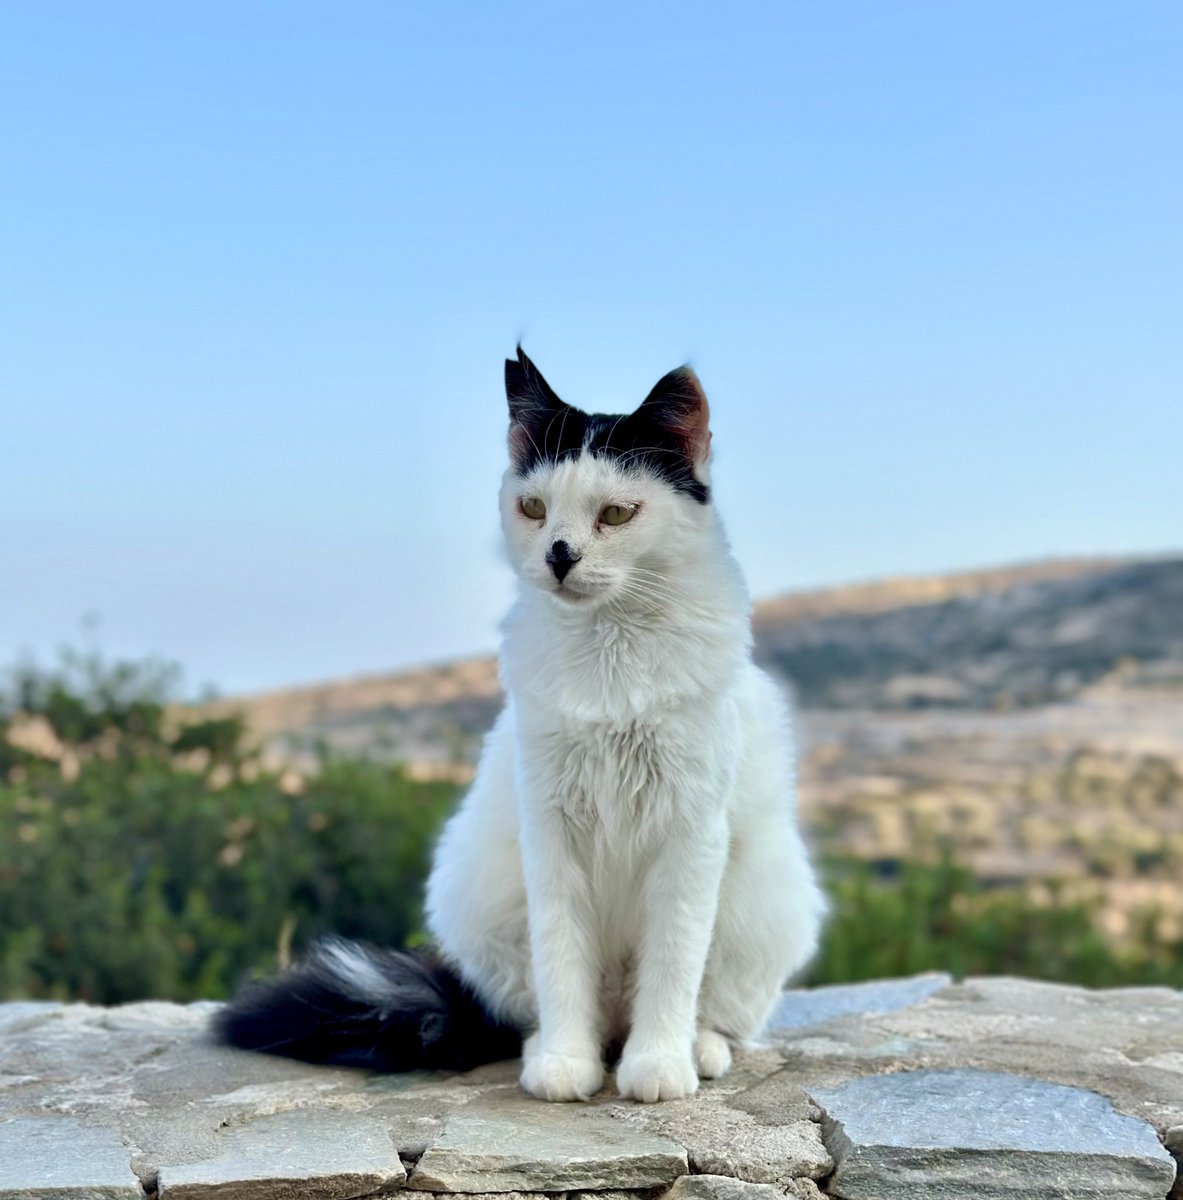 The much-loved Hattie is a spayed female and one of the Aegean cats who we care for on this tiny Greek island.
You can help the #cats on Iraklia by making a small donation to fund life-saving medicines, neutering and food all year round. Purr!
#CatsLover 
gofundme.com/f/cats-of-irak…